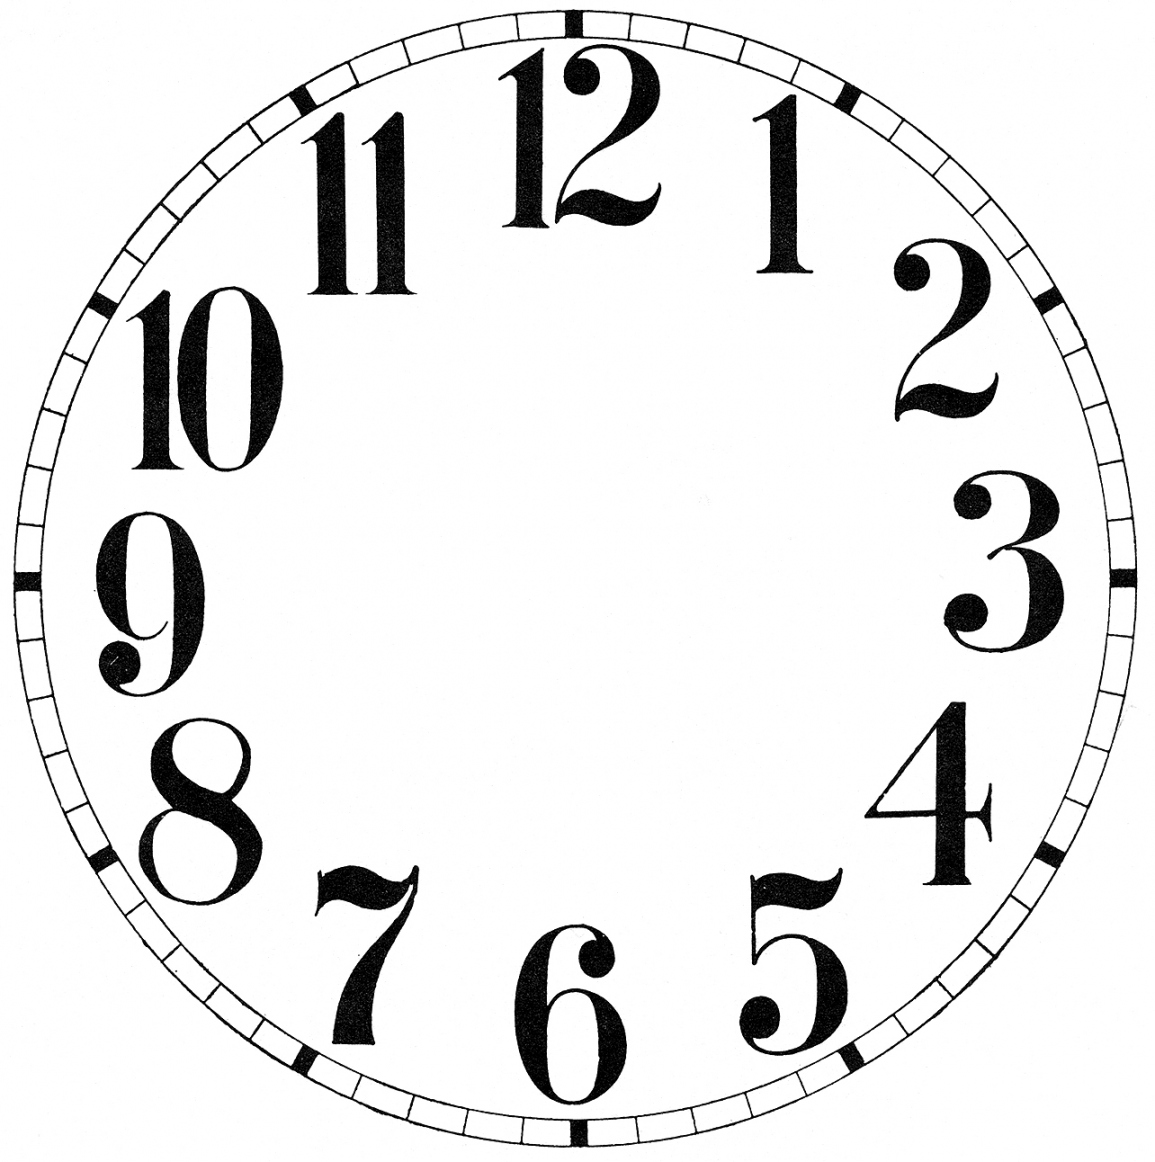 Clock Face Images - Print Your Own! - The Graphics Fairy